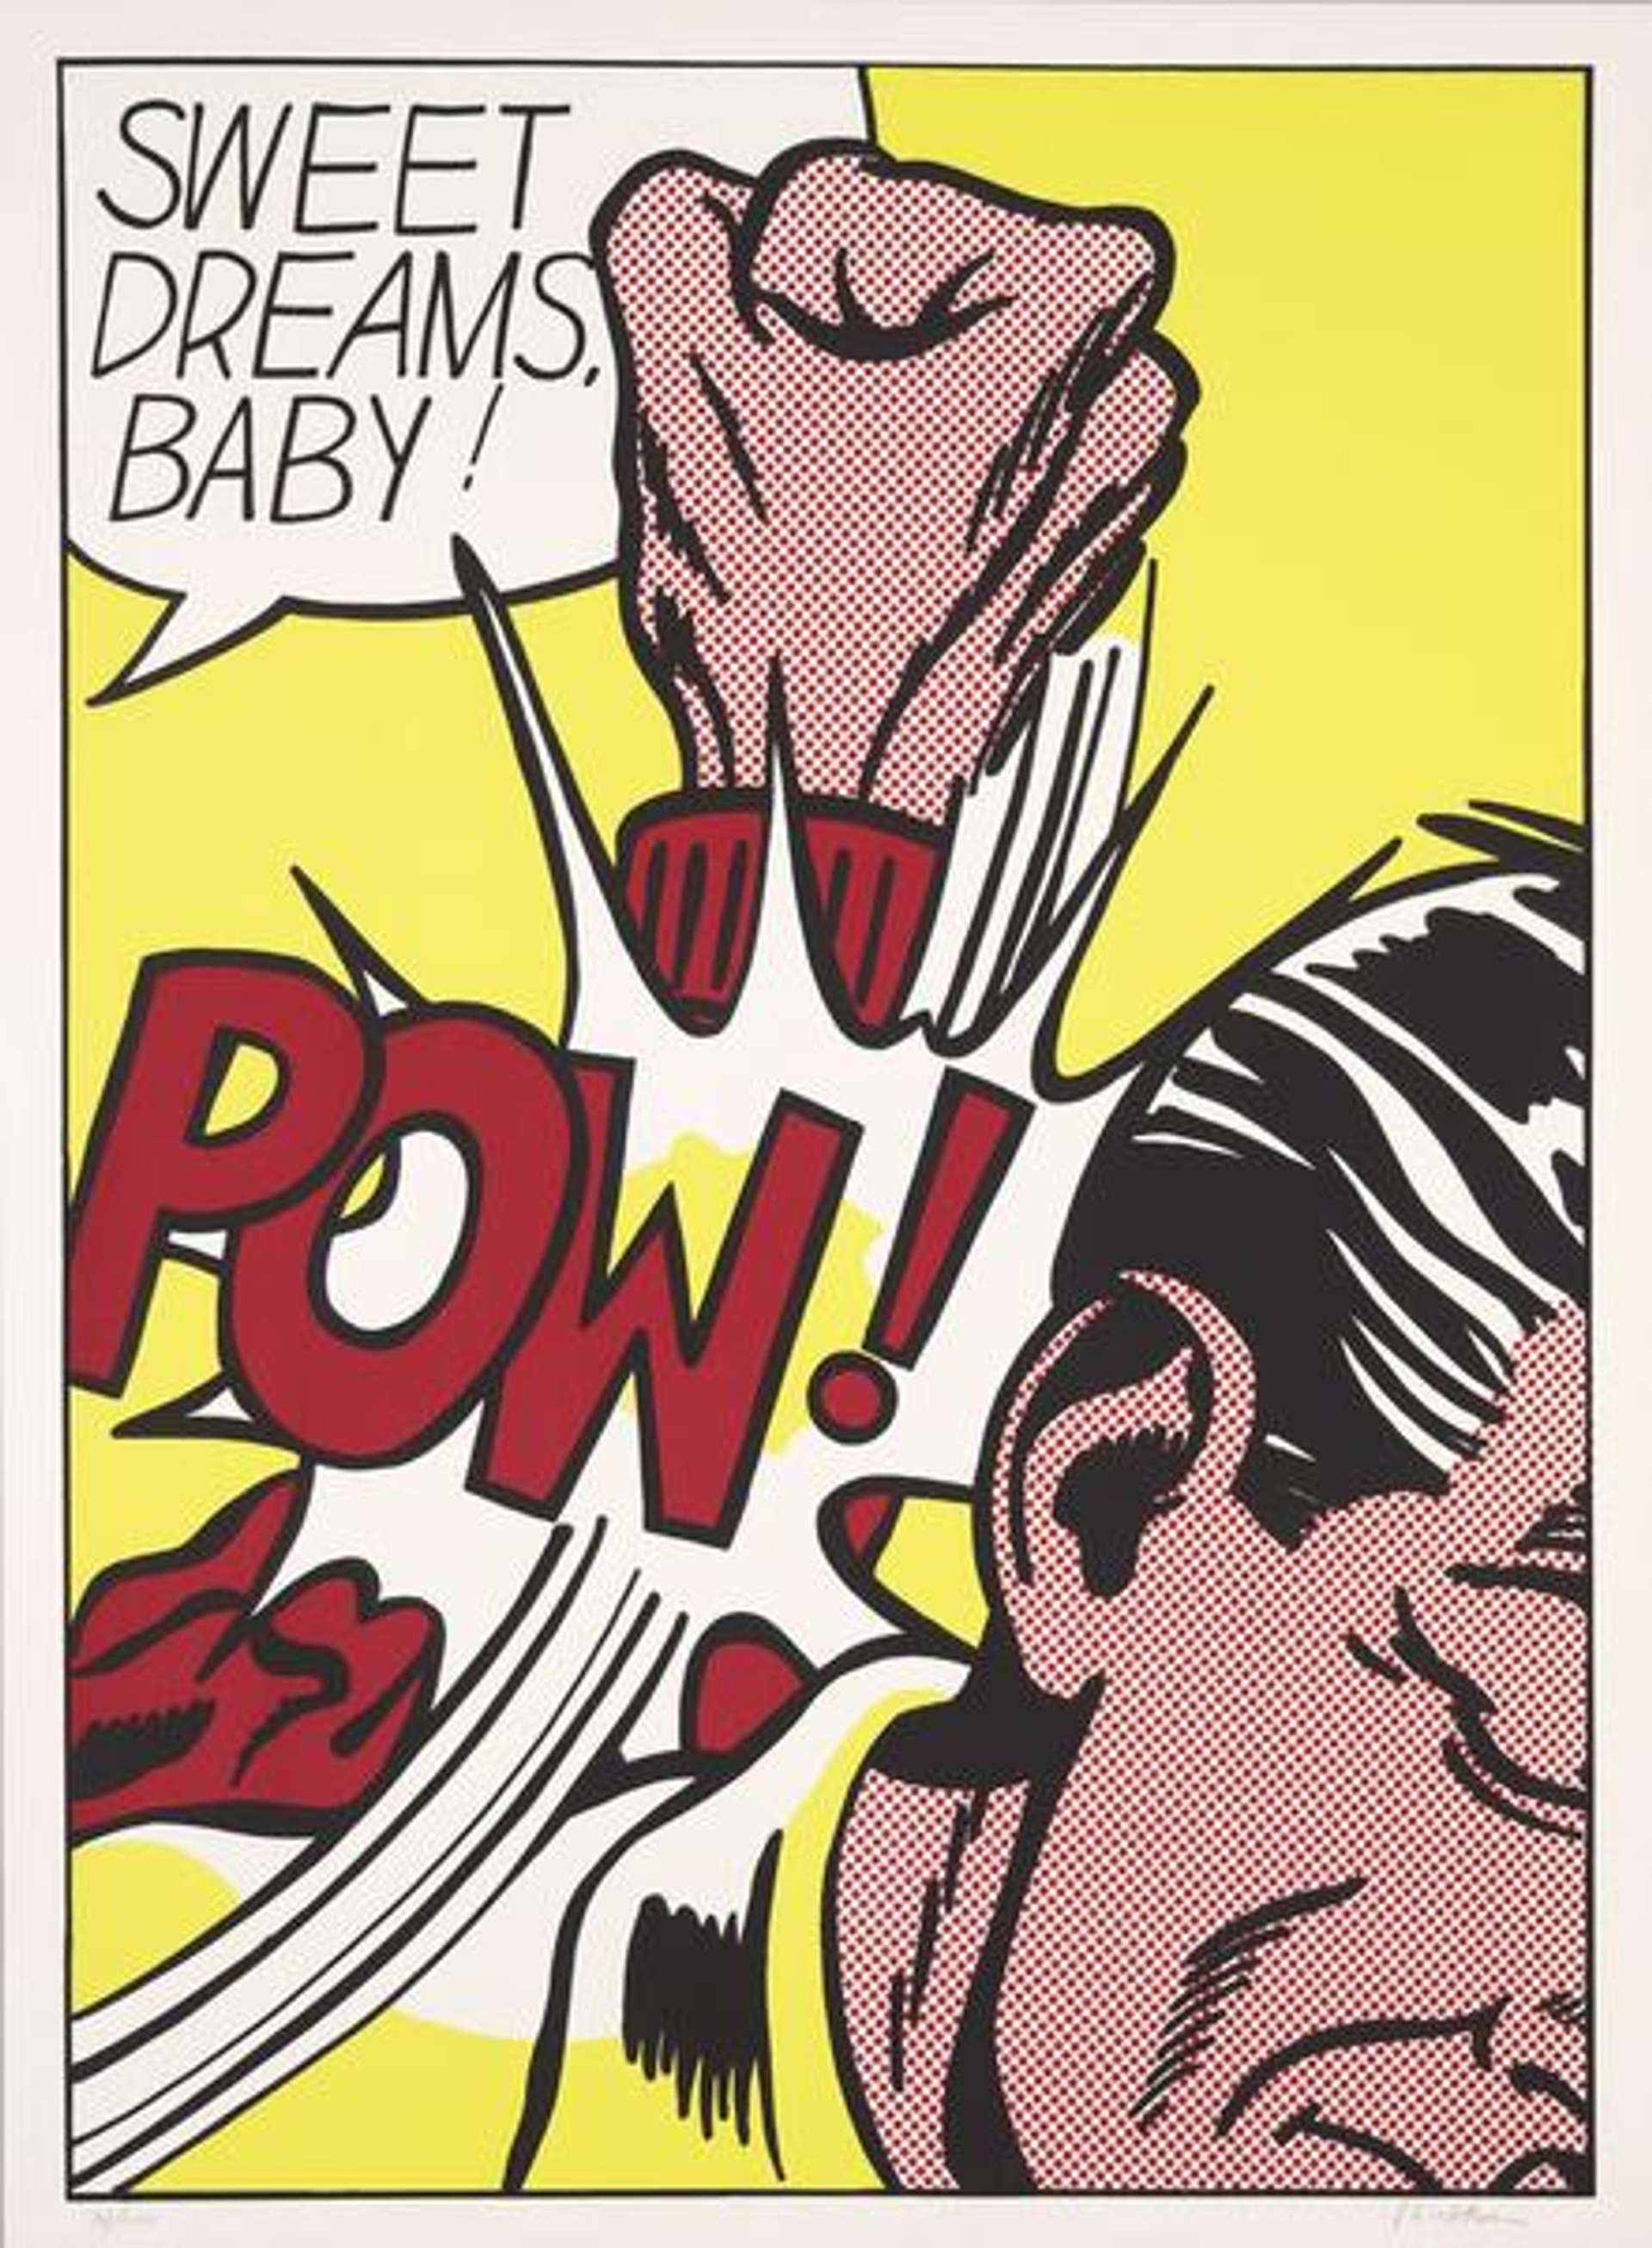 An image of the print Sweet Dreams Baby by Roy Lichtenstein. It shows a fist, overlaid with the word "Pow!", apparently punching a man's face. A speech balloon with the phrase "Sweet dreams, baby!" is in the top left corner.